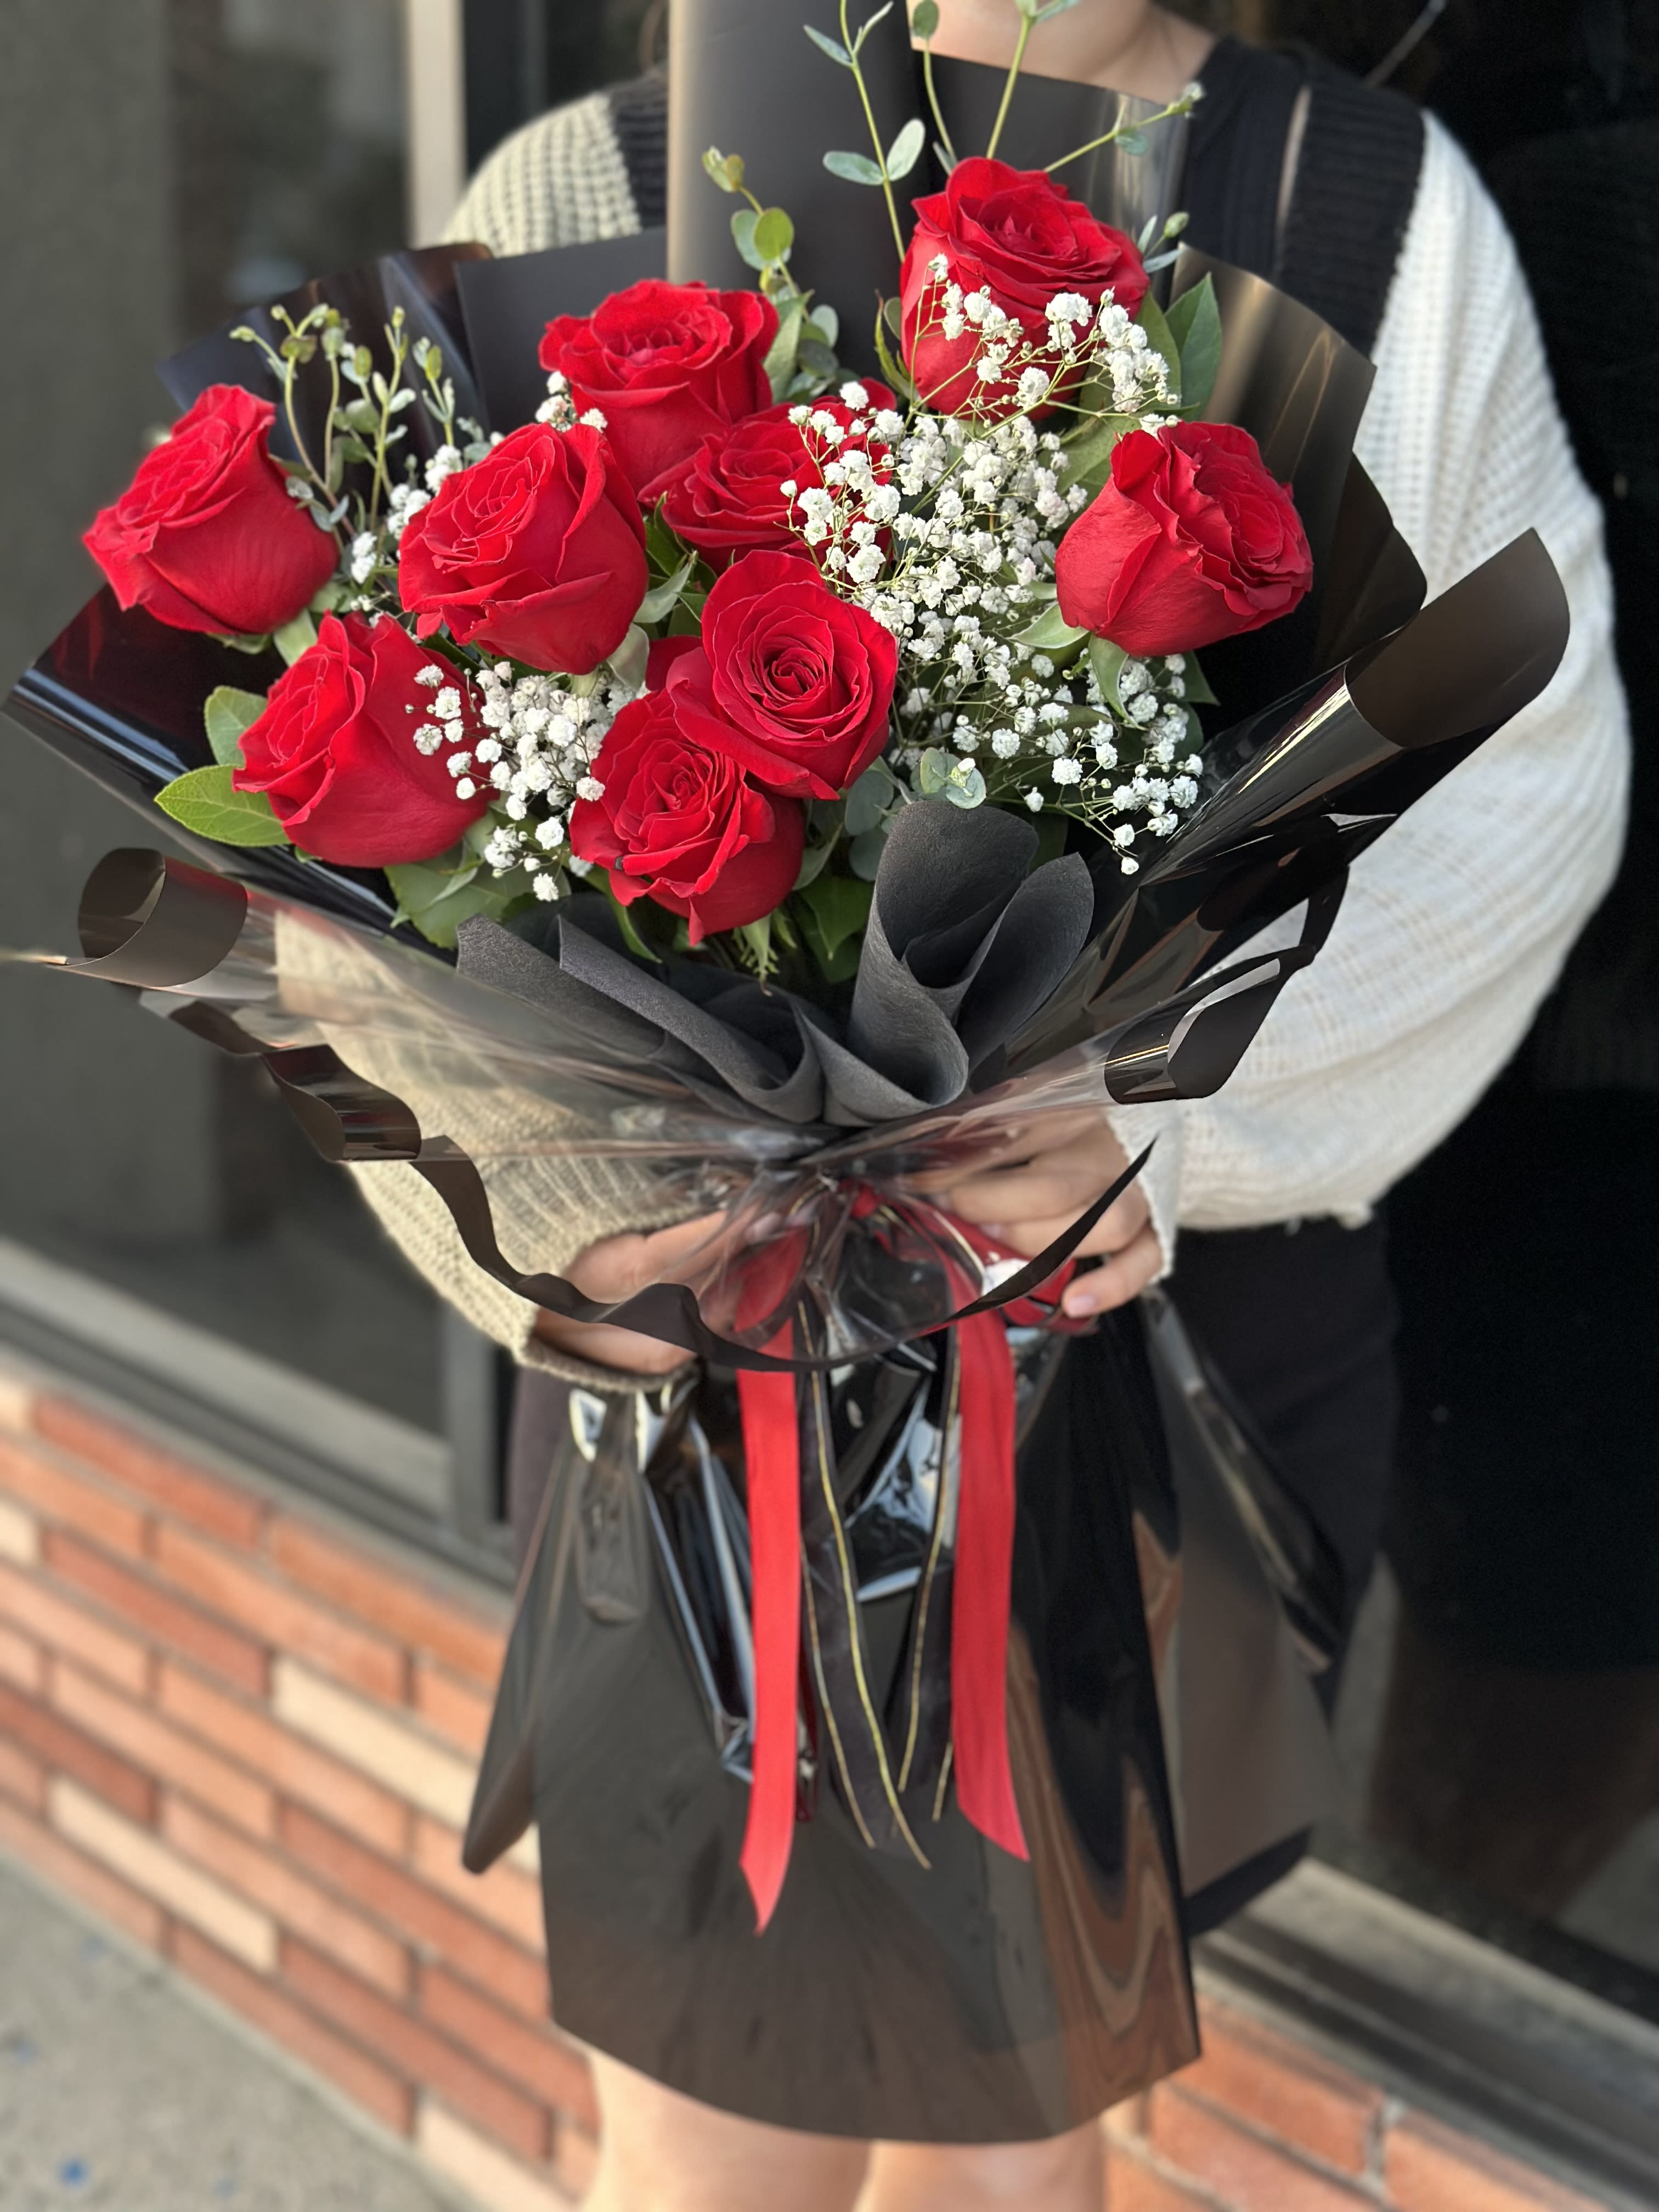 520 Love - Real bouquet size.  - There may be some substitution applied on your product due to seasons and the market supplies.